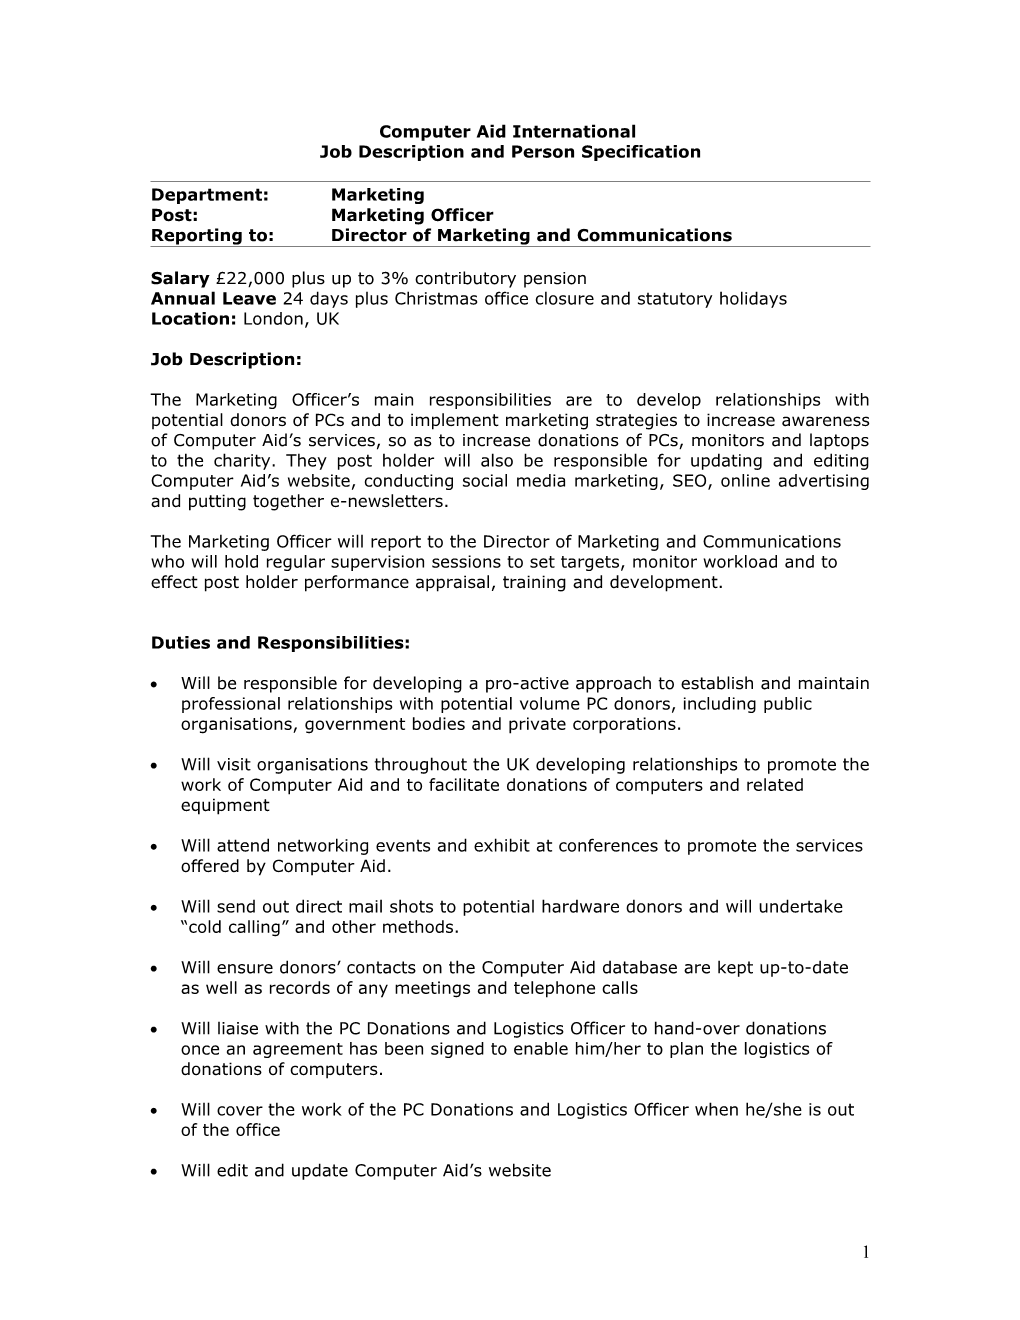 Computer Aid International Job Description and Person Specification